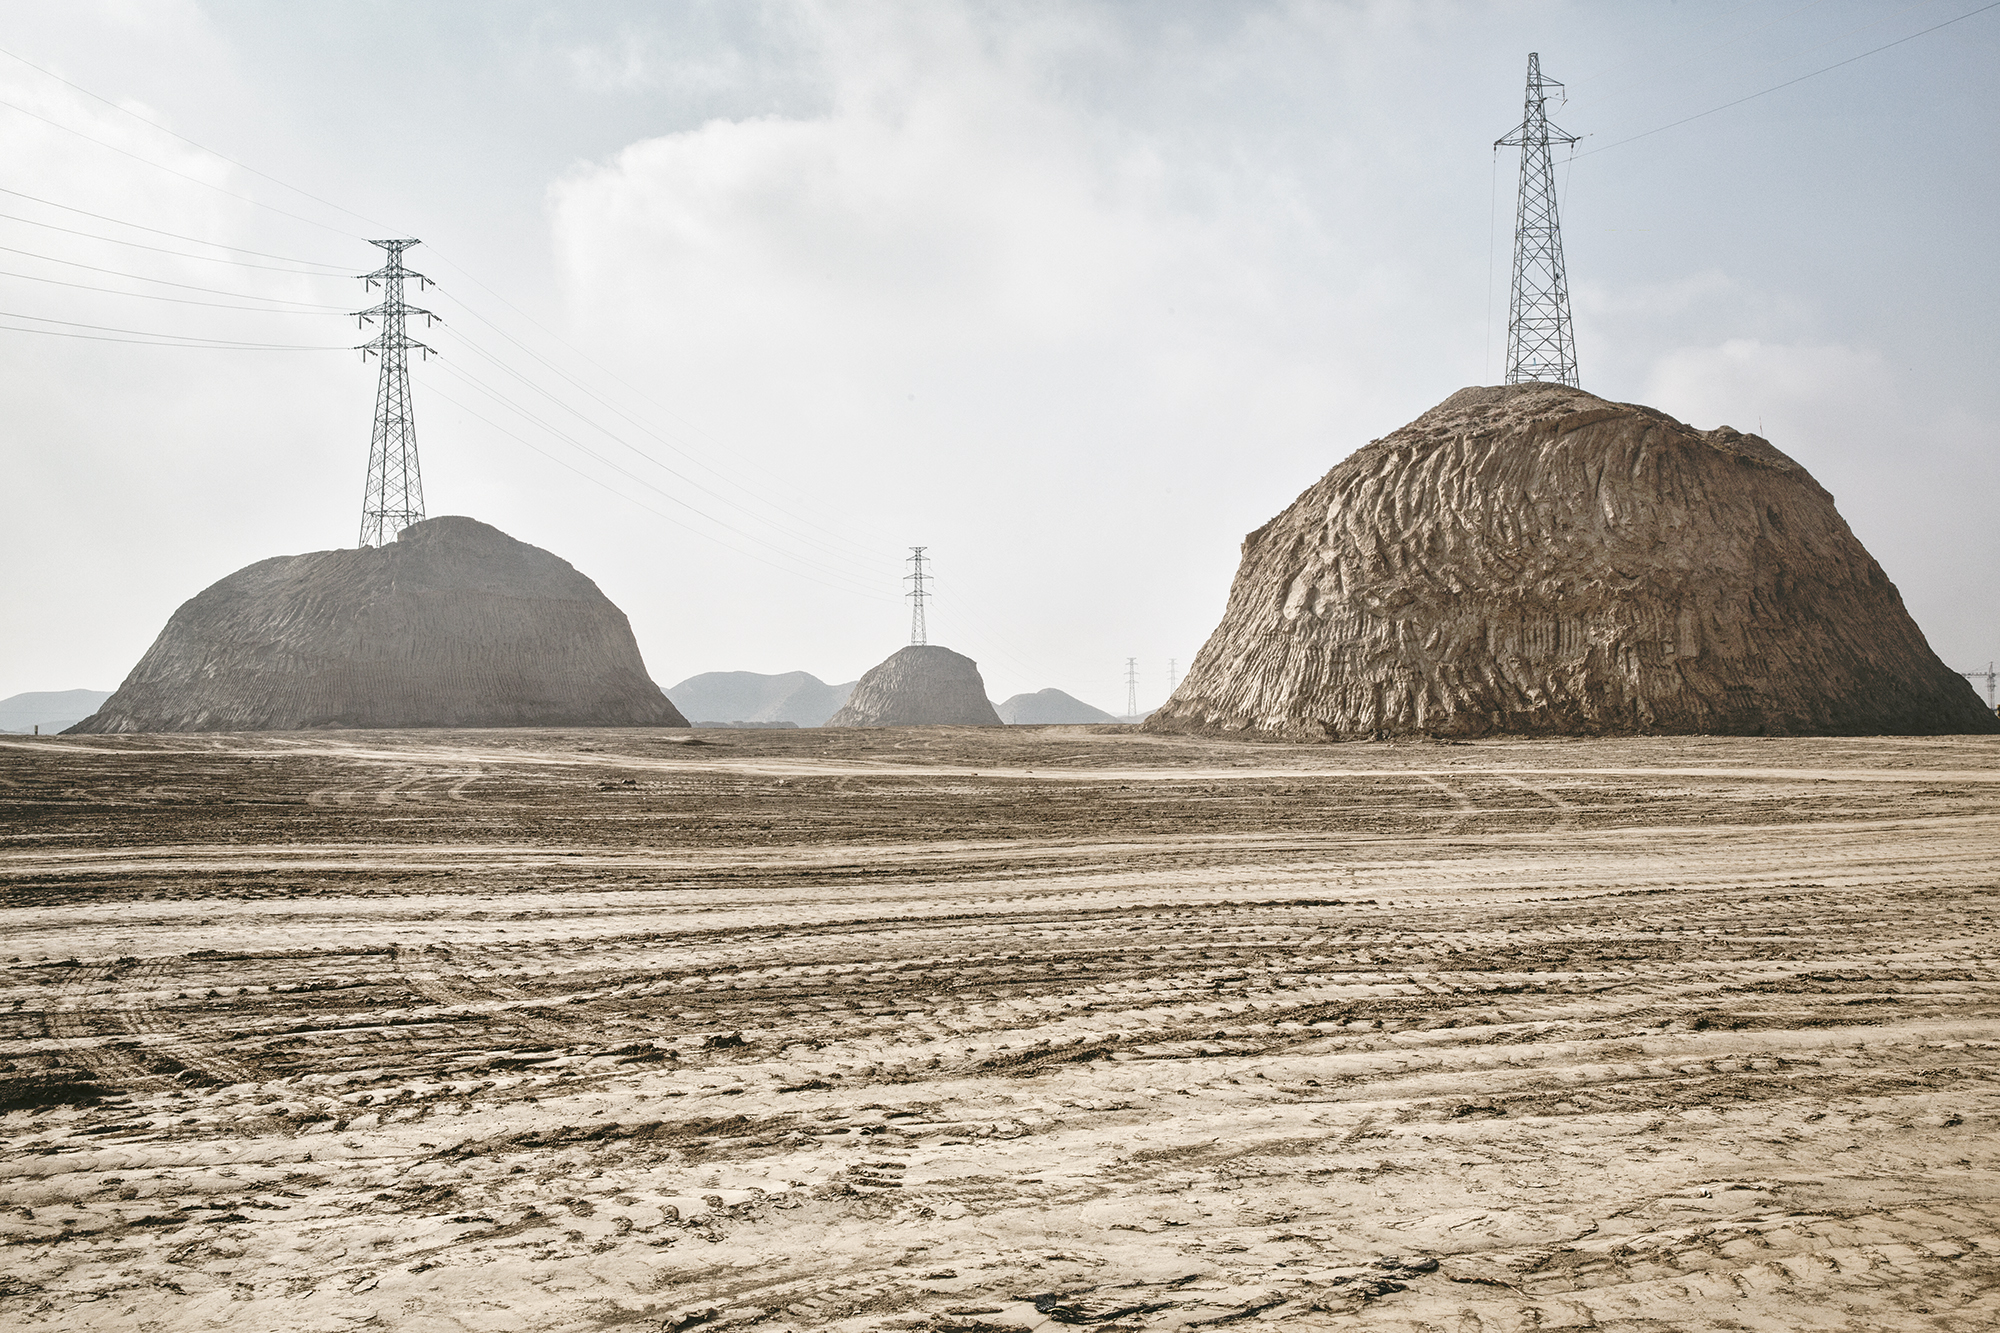 Pylons, from Shifting Sands, China